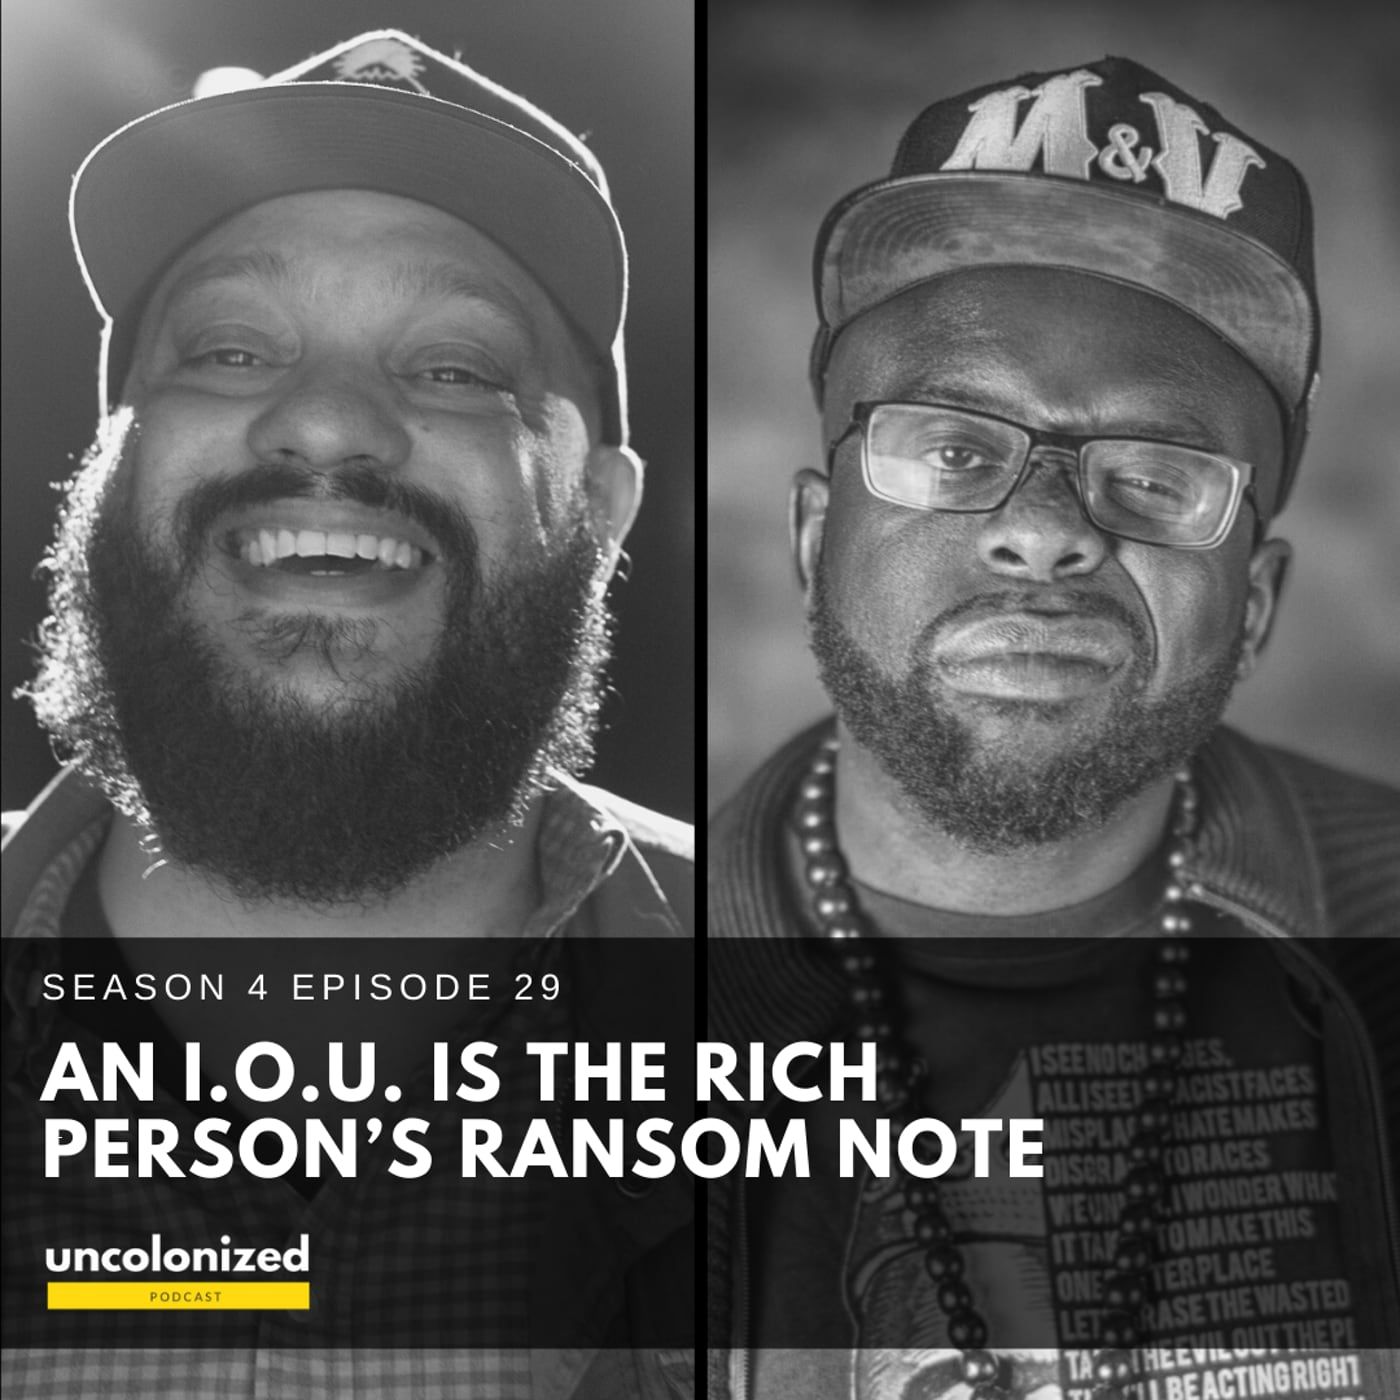 S04E29 – The ‘IOU’ is The Rich Persons Stick Up Note